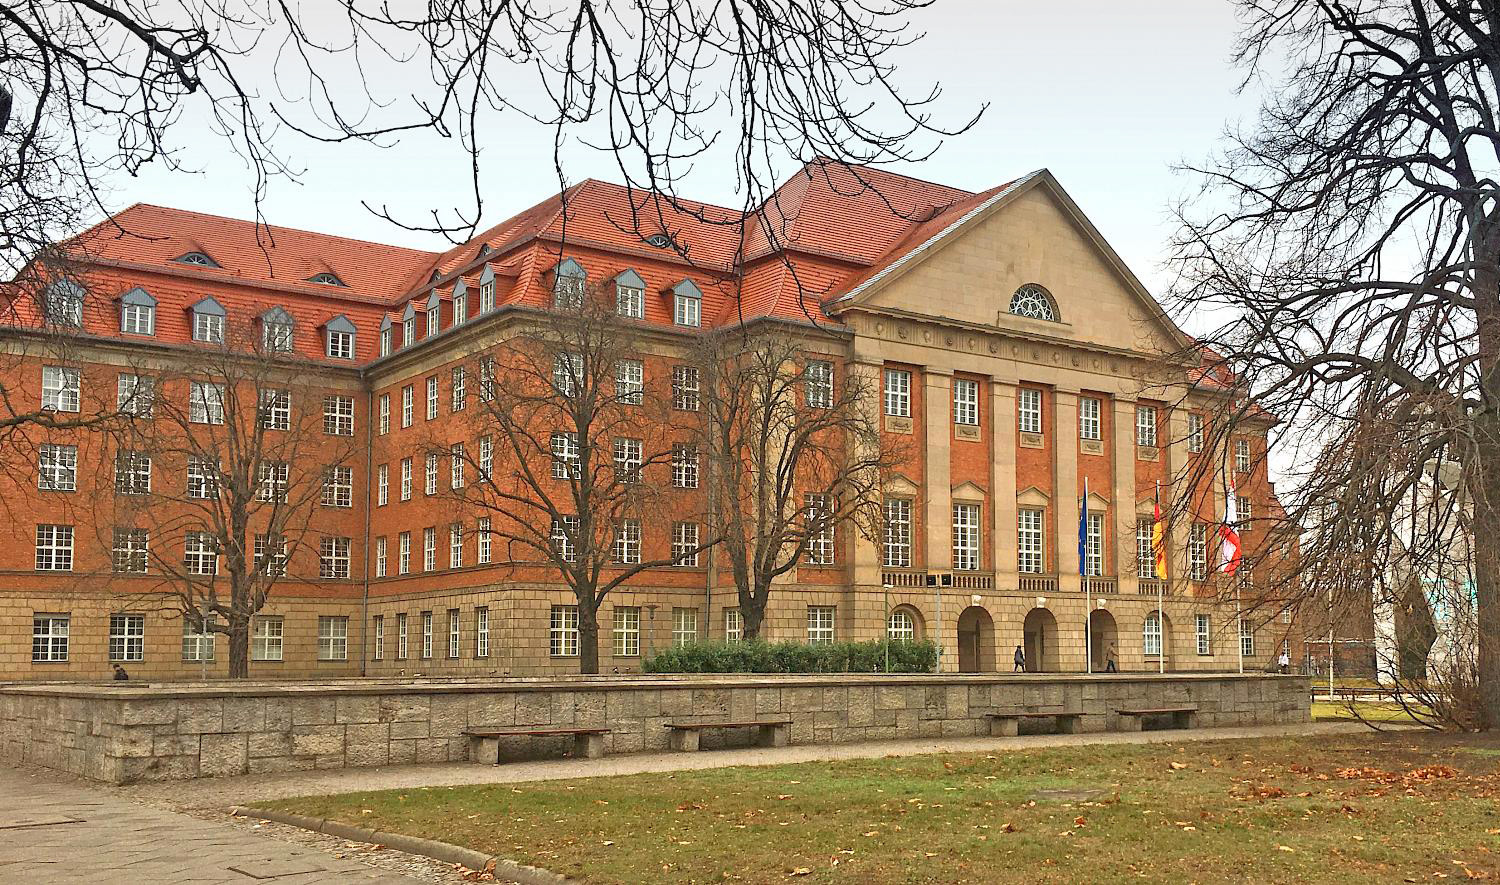 Historical Administration building Rohrdamm in Berlin